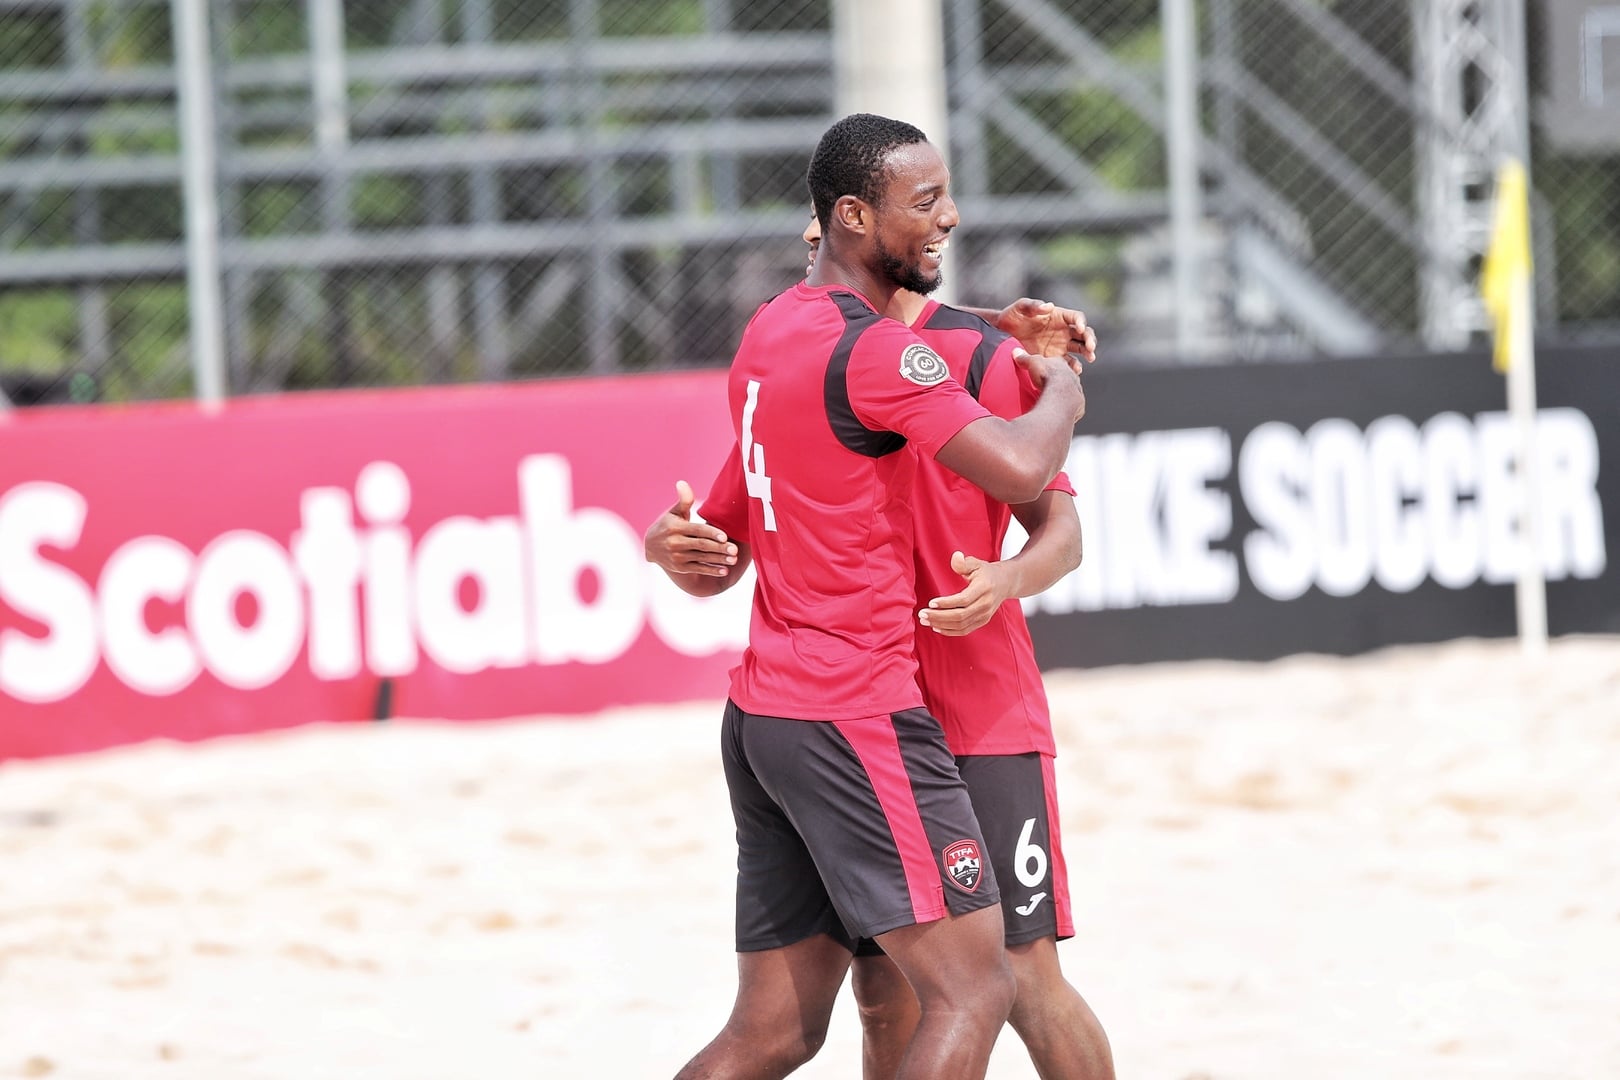 TT aiming for victory as they advance to Beach Soccer quarterfinals